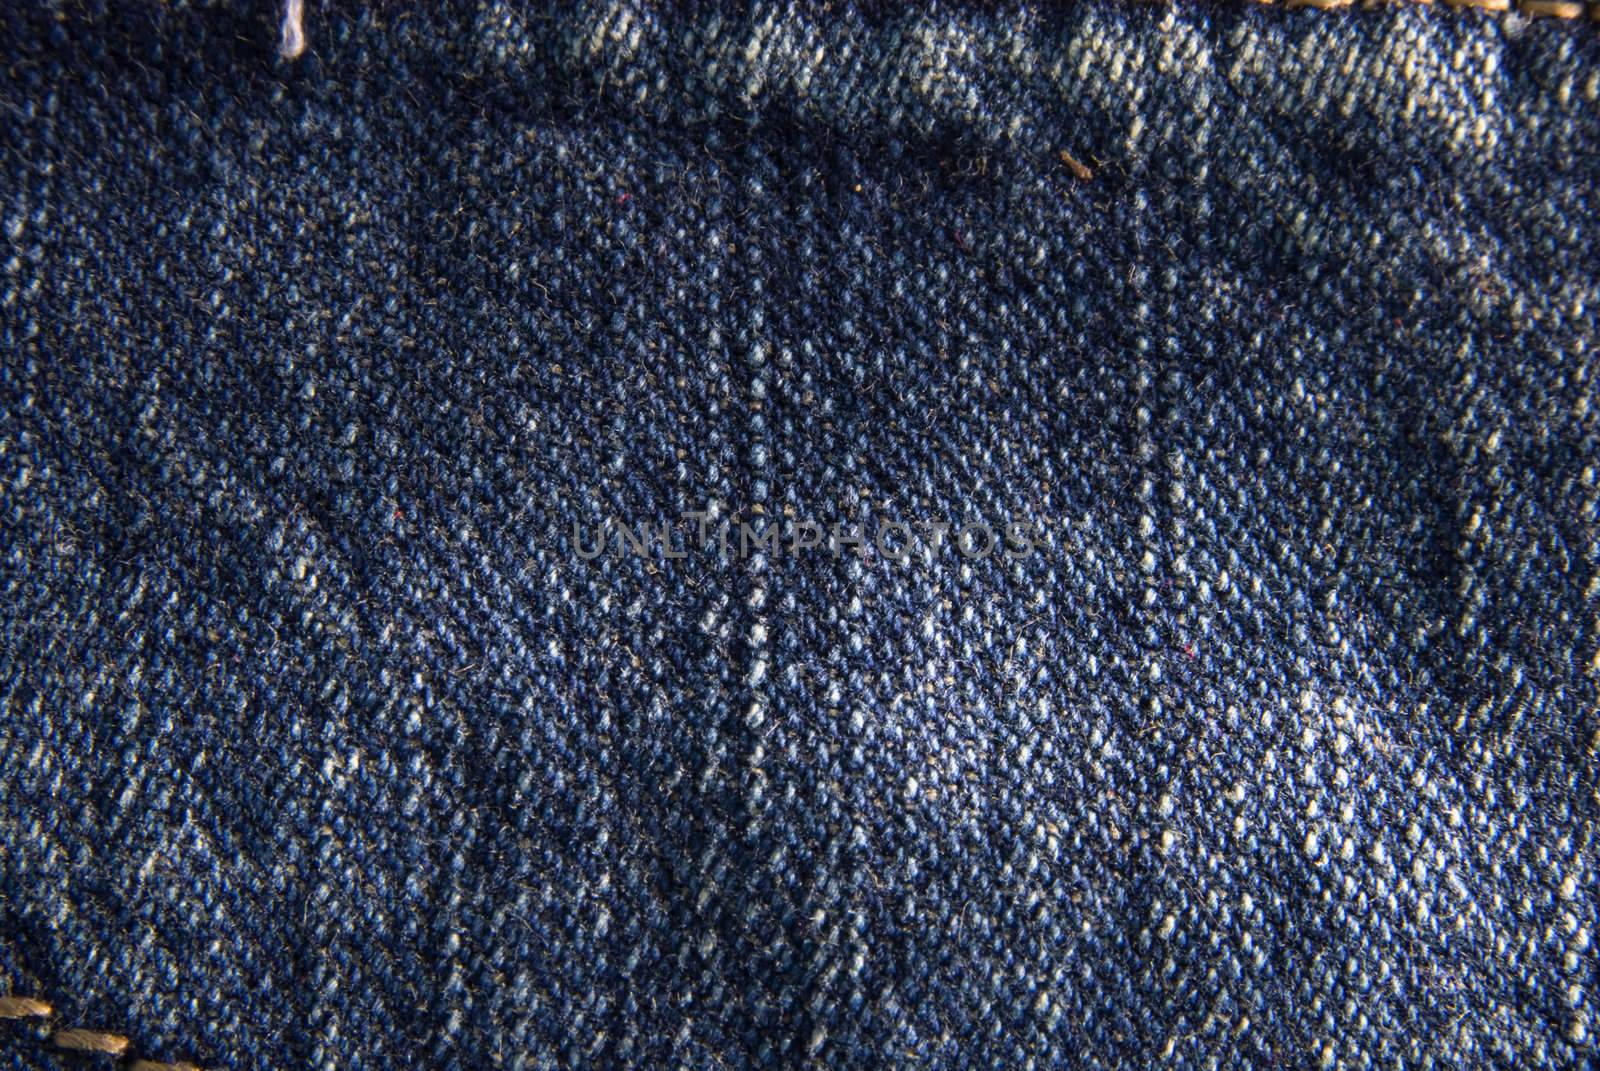 Blue denim jeans texture macro close up. Useful as background for design works.